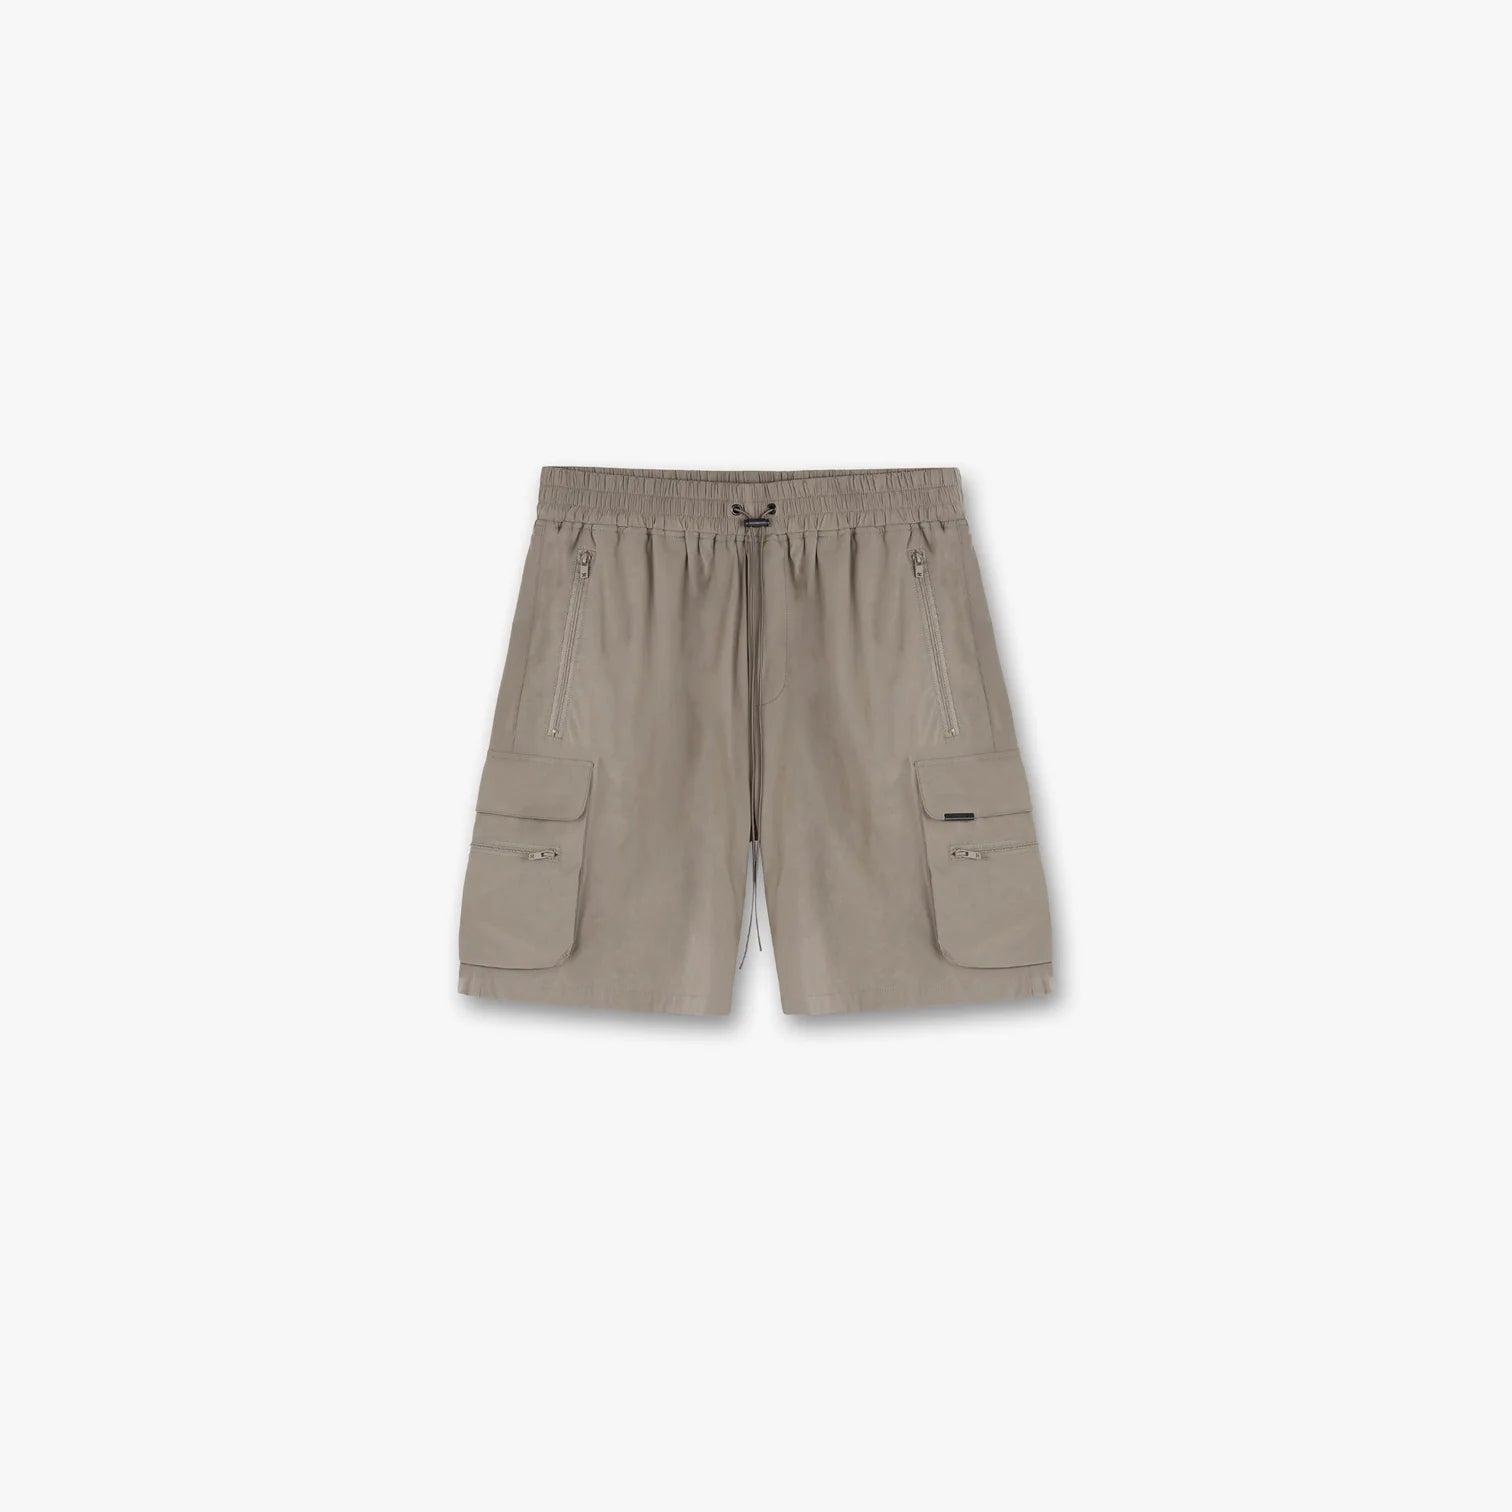 REPRESENT 247 SHORTS - TAUPE